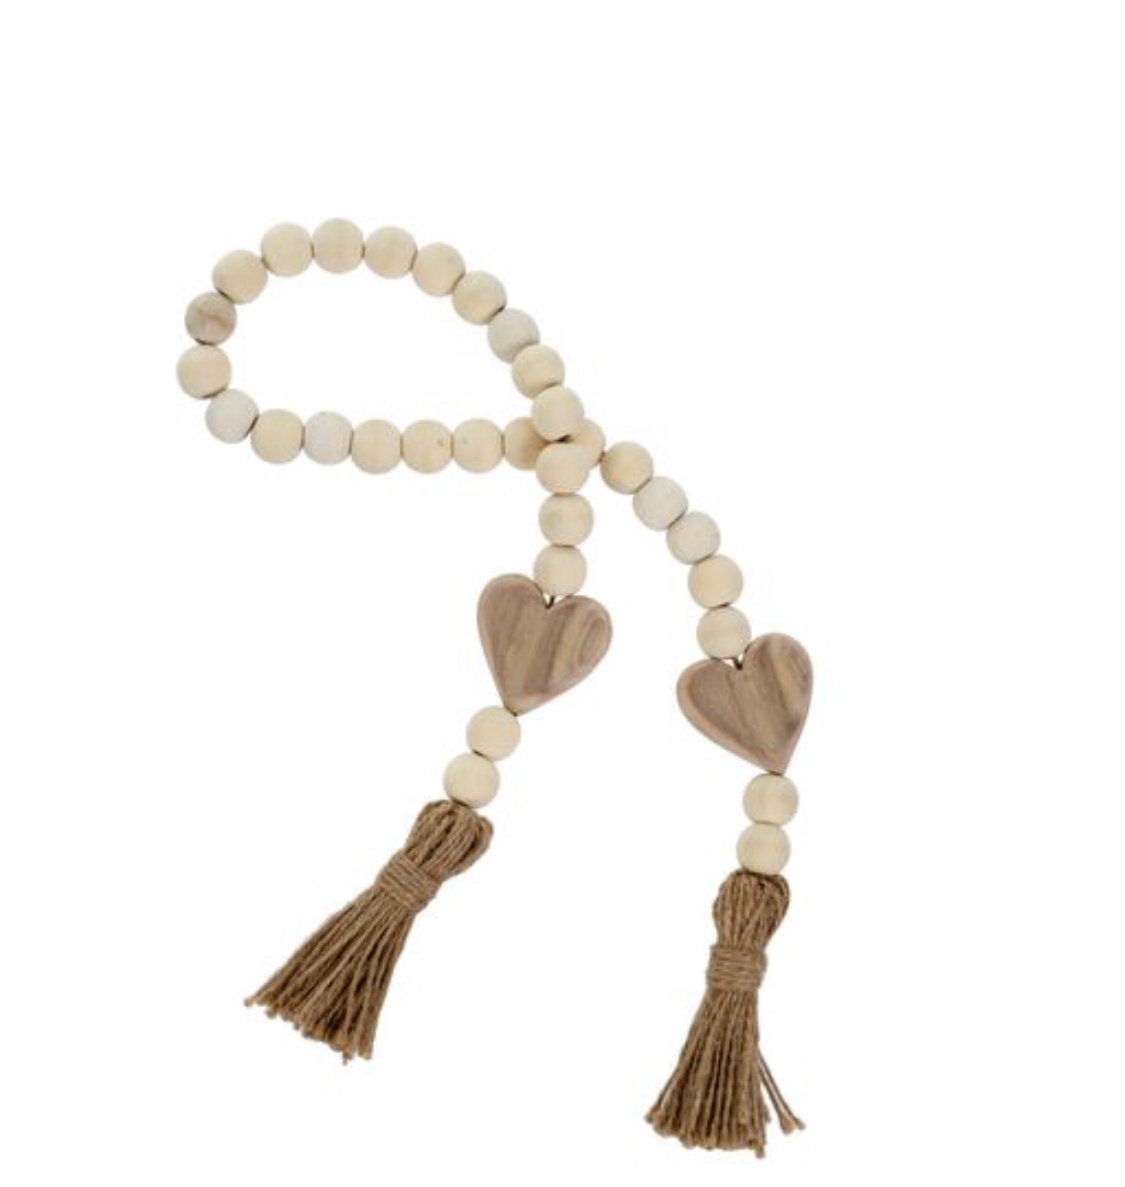 Indaba Trading Co. Heart Blessing Beads